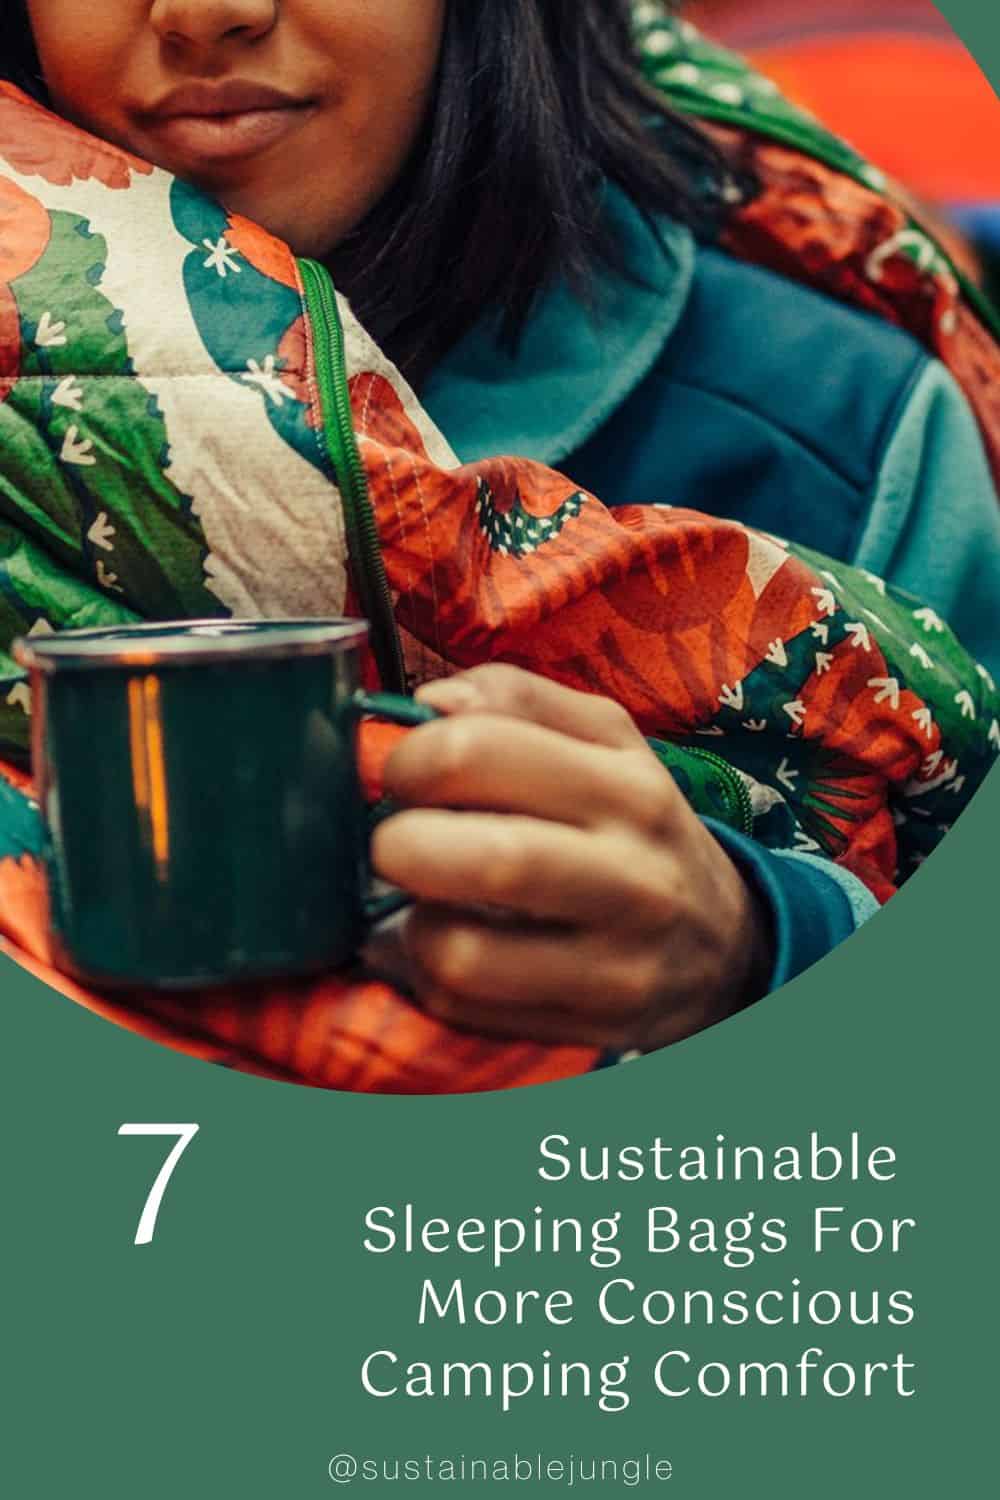 7 Sustainable Sleeping Bags For More Conscious Camping Comfort Image by The North Face #sustainablesleepingbags #sustainablebackpackingsleepingbags #sustainablecampingsleepingbags #ecofriendlysleepingbags #ecofriendlybackpackingsleepingbags #sustainablejungle